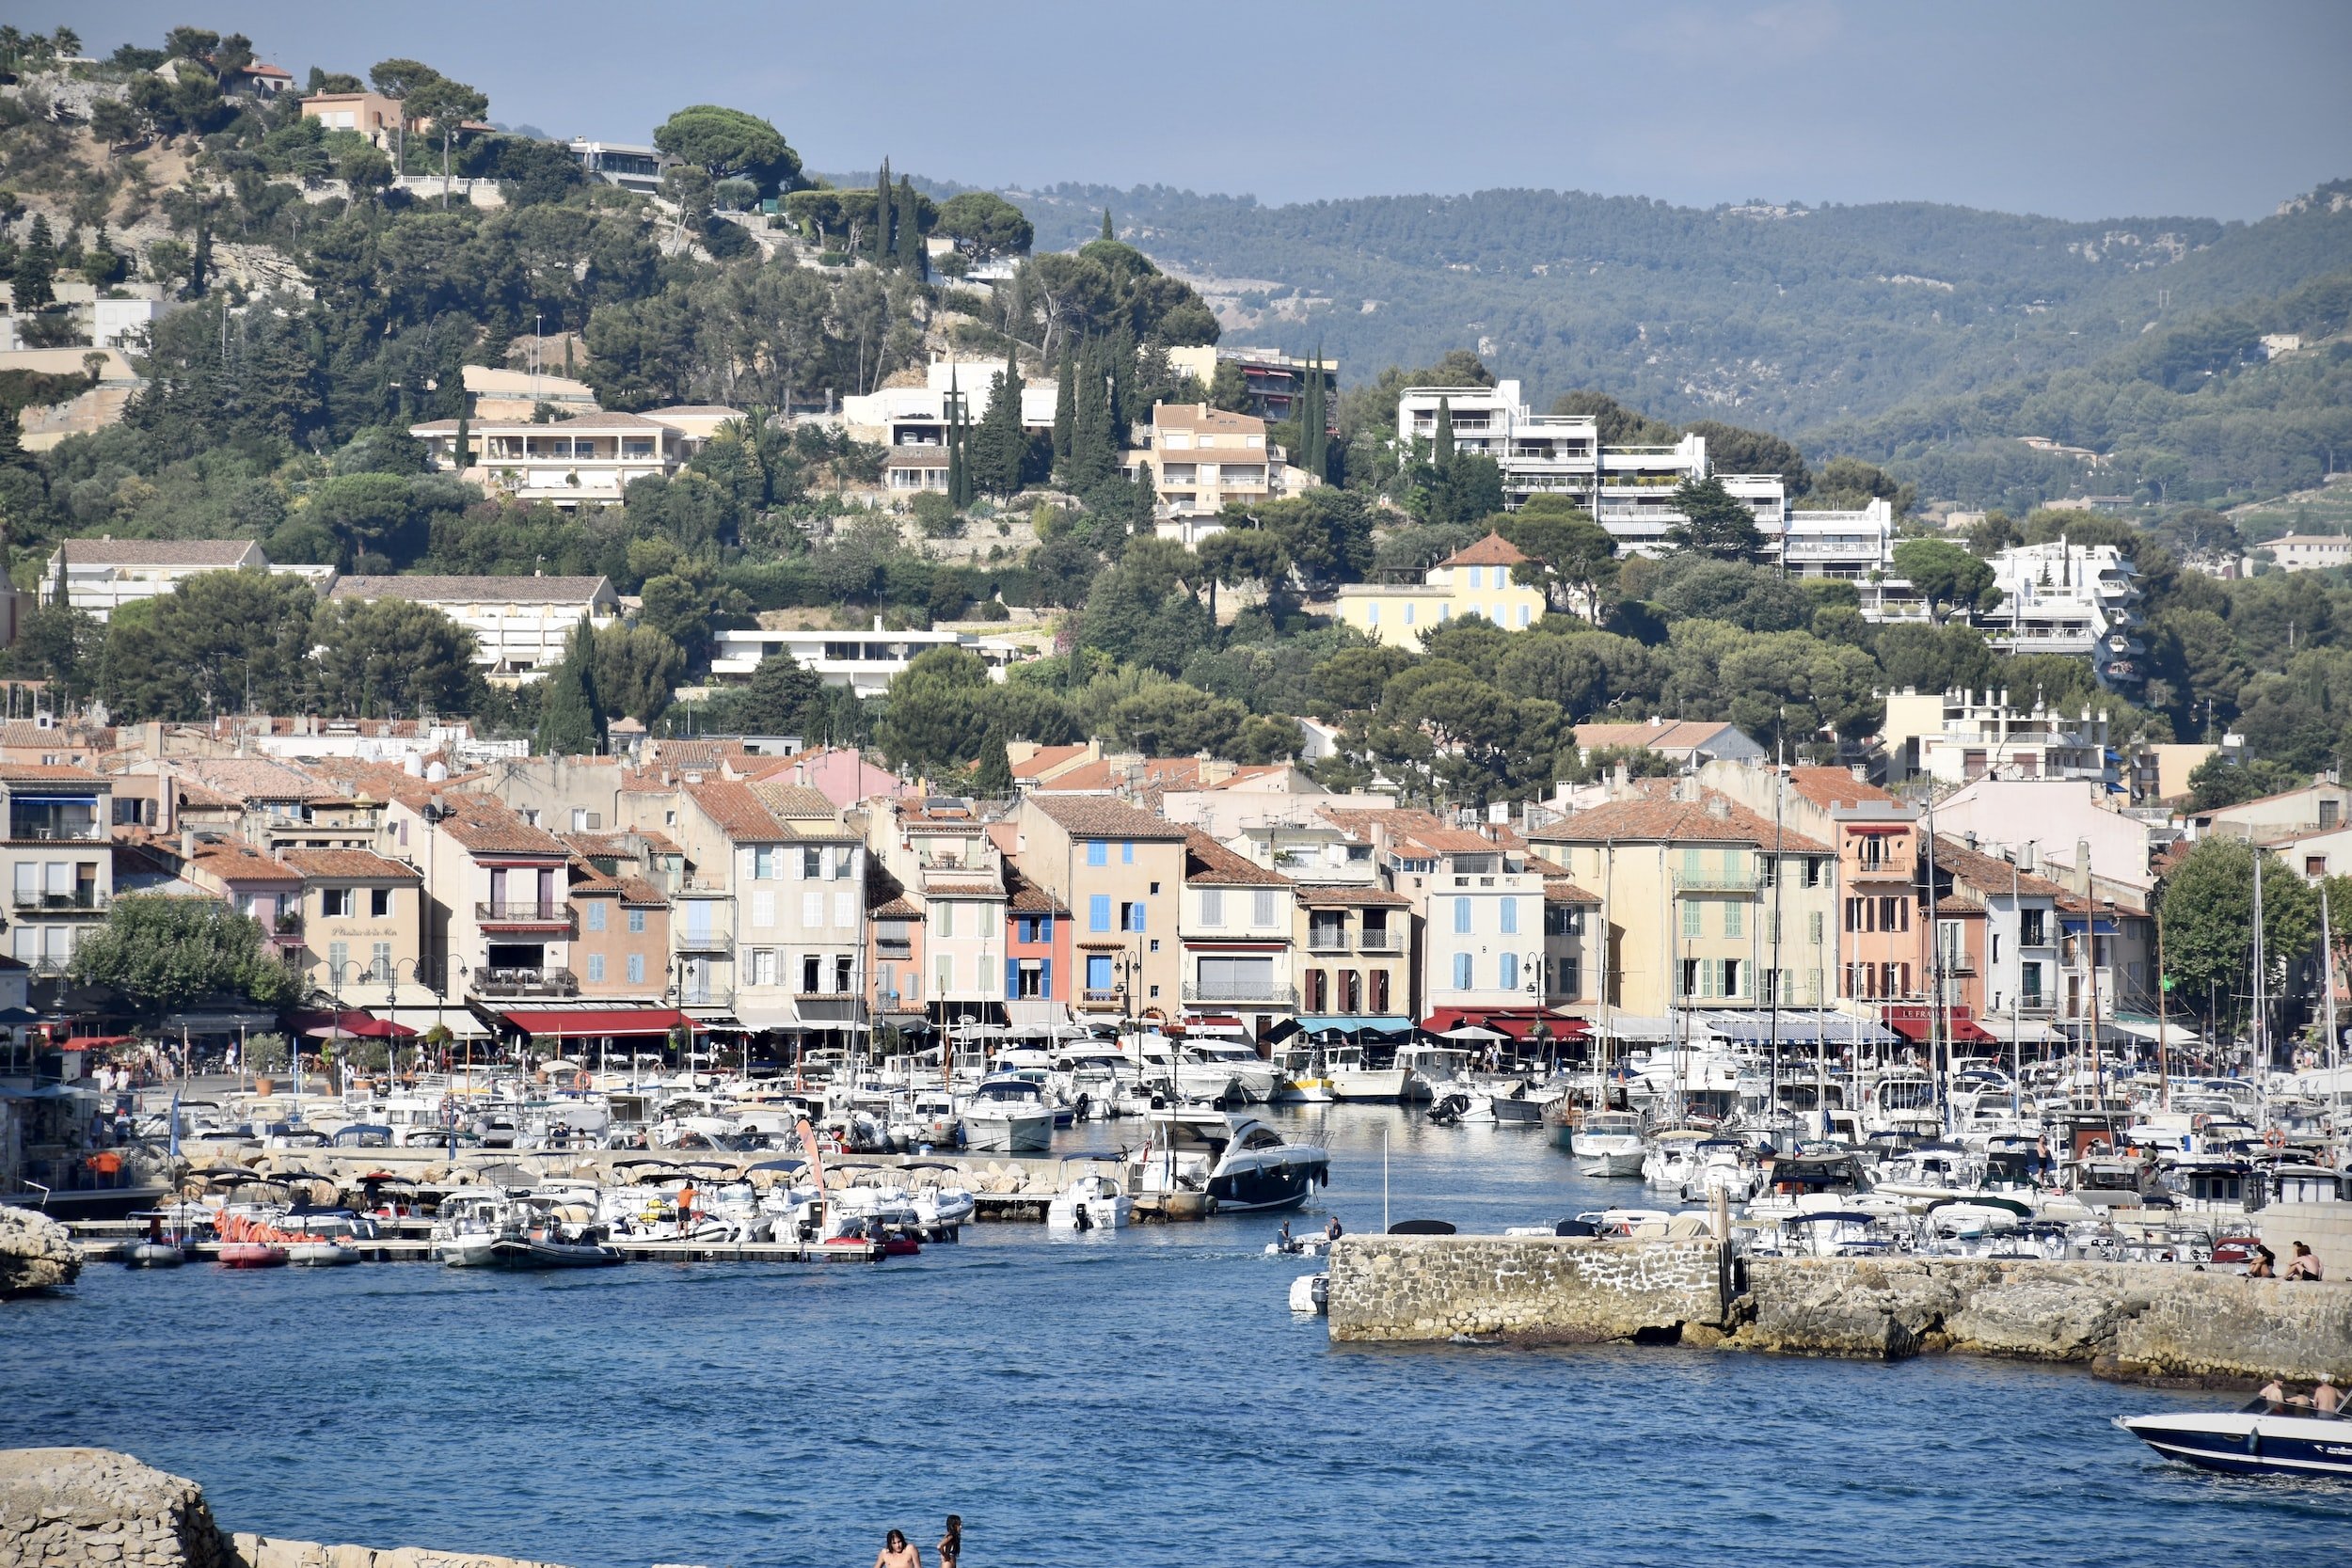 Guided tour of Cassis